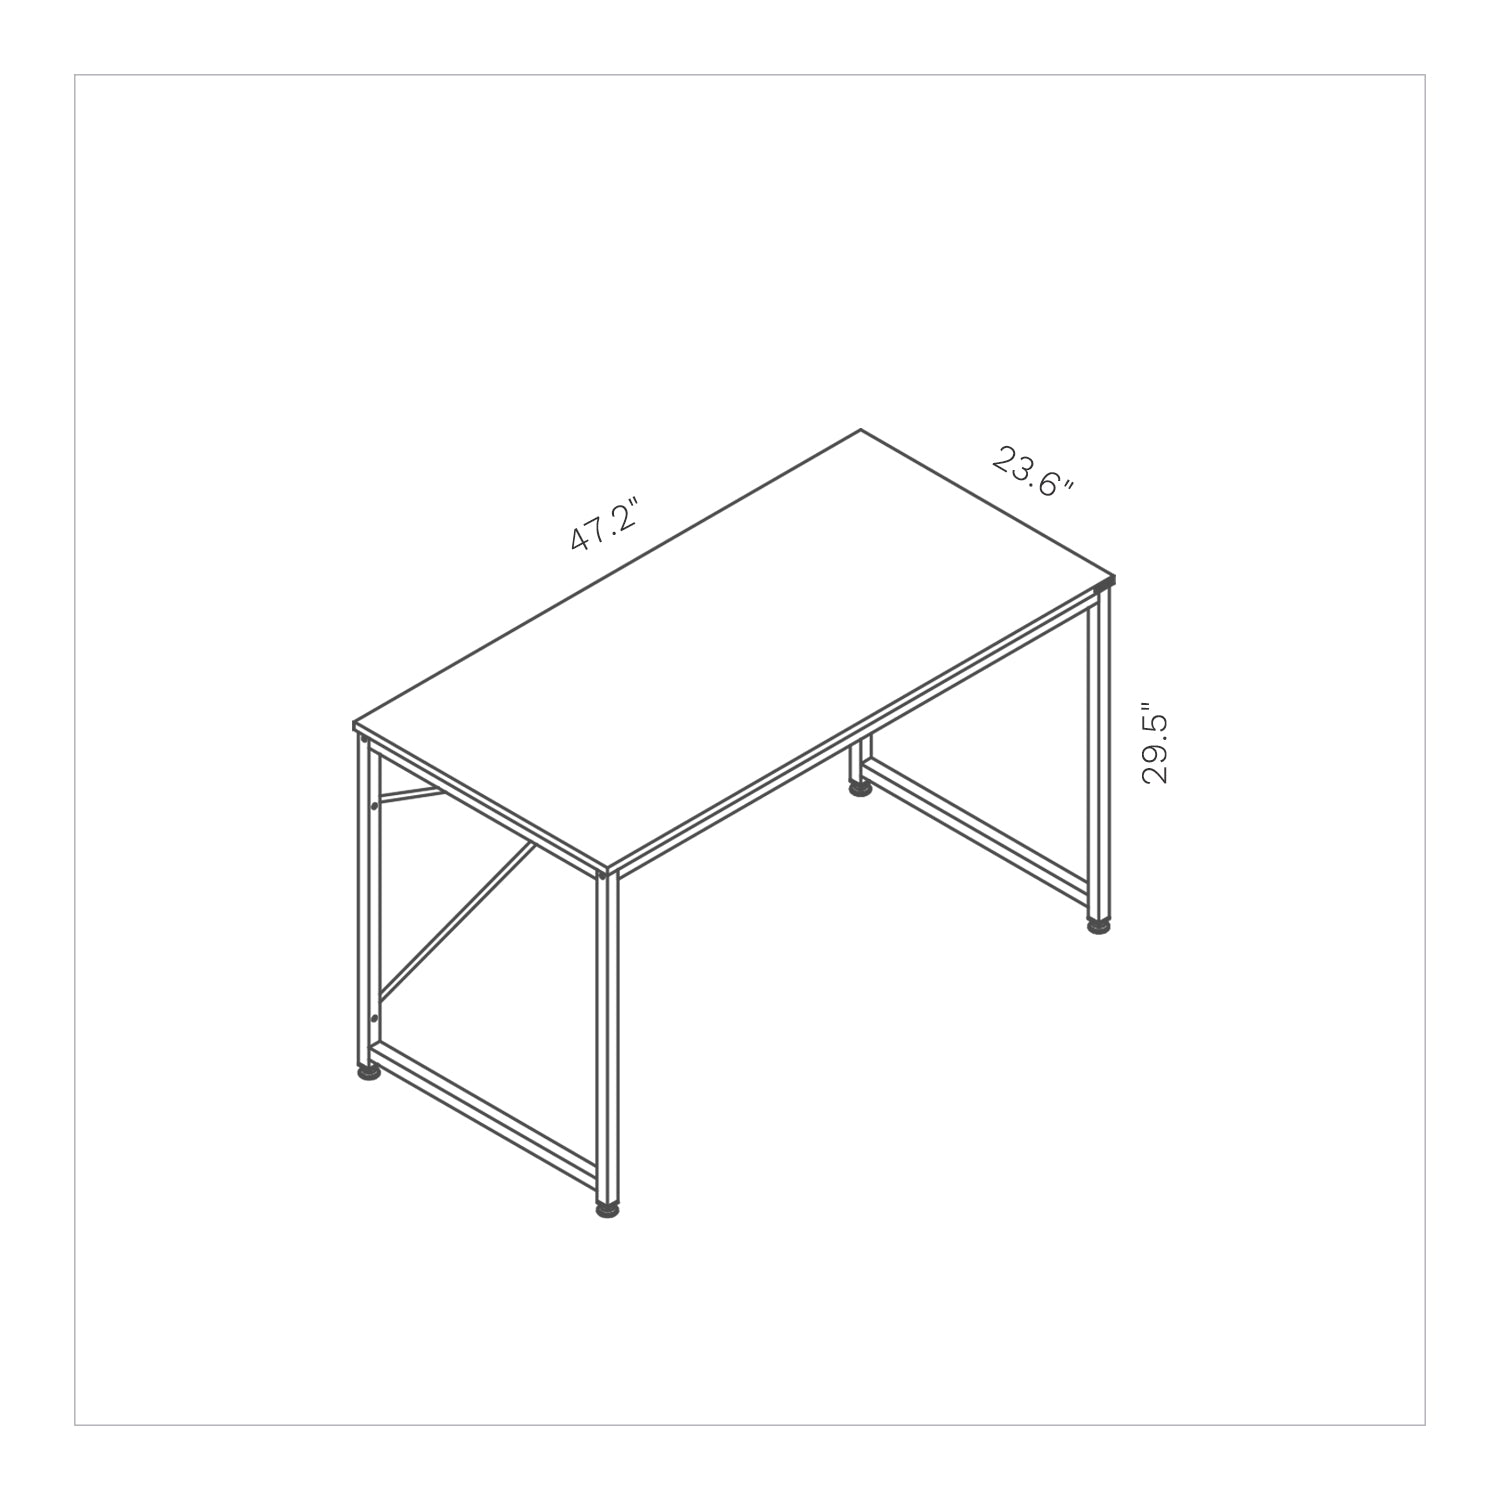 SOFSYS modern industrial design computer desk with 47.2” x 23.6” oak table top and 29.5” tall metal frame. simple and spacious